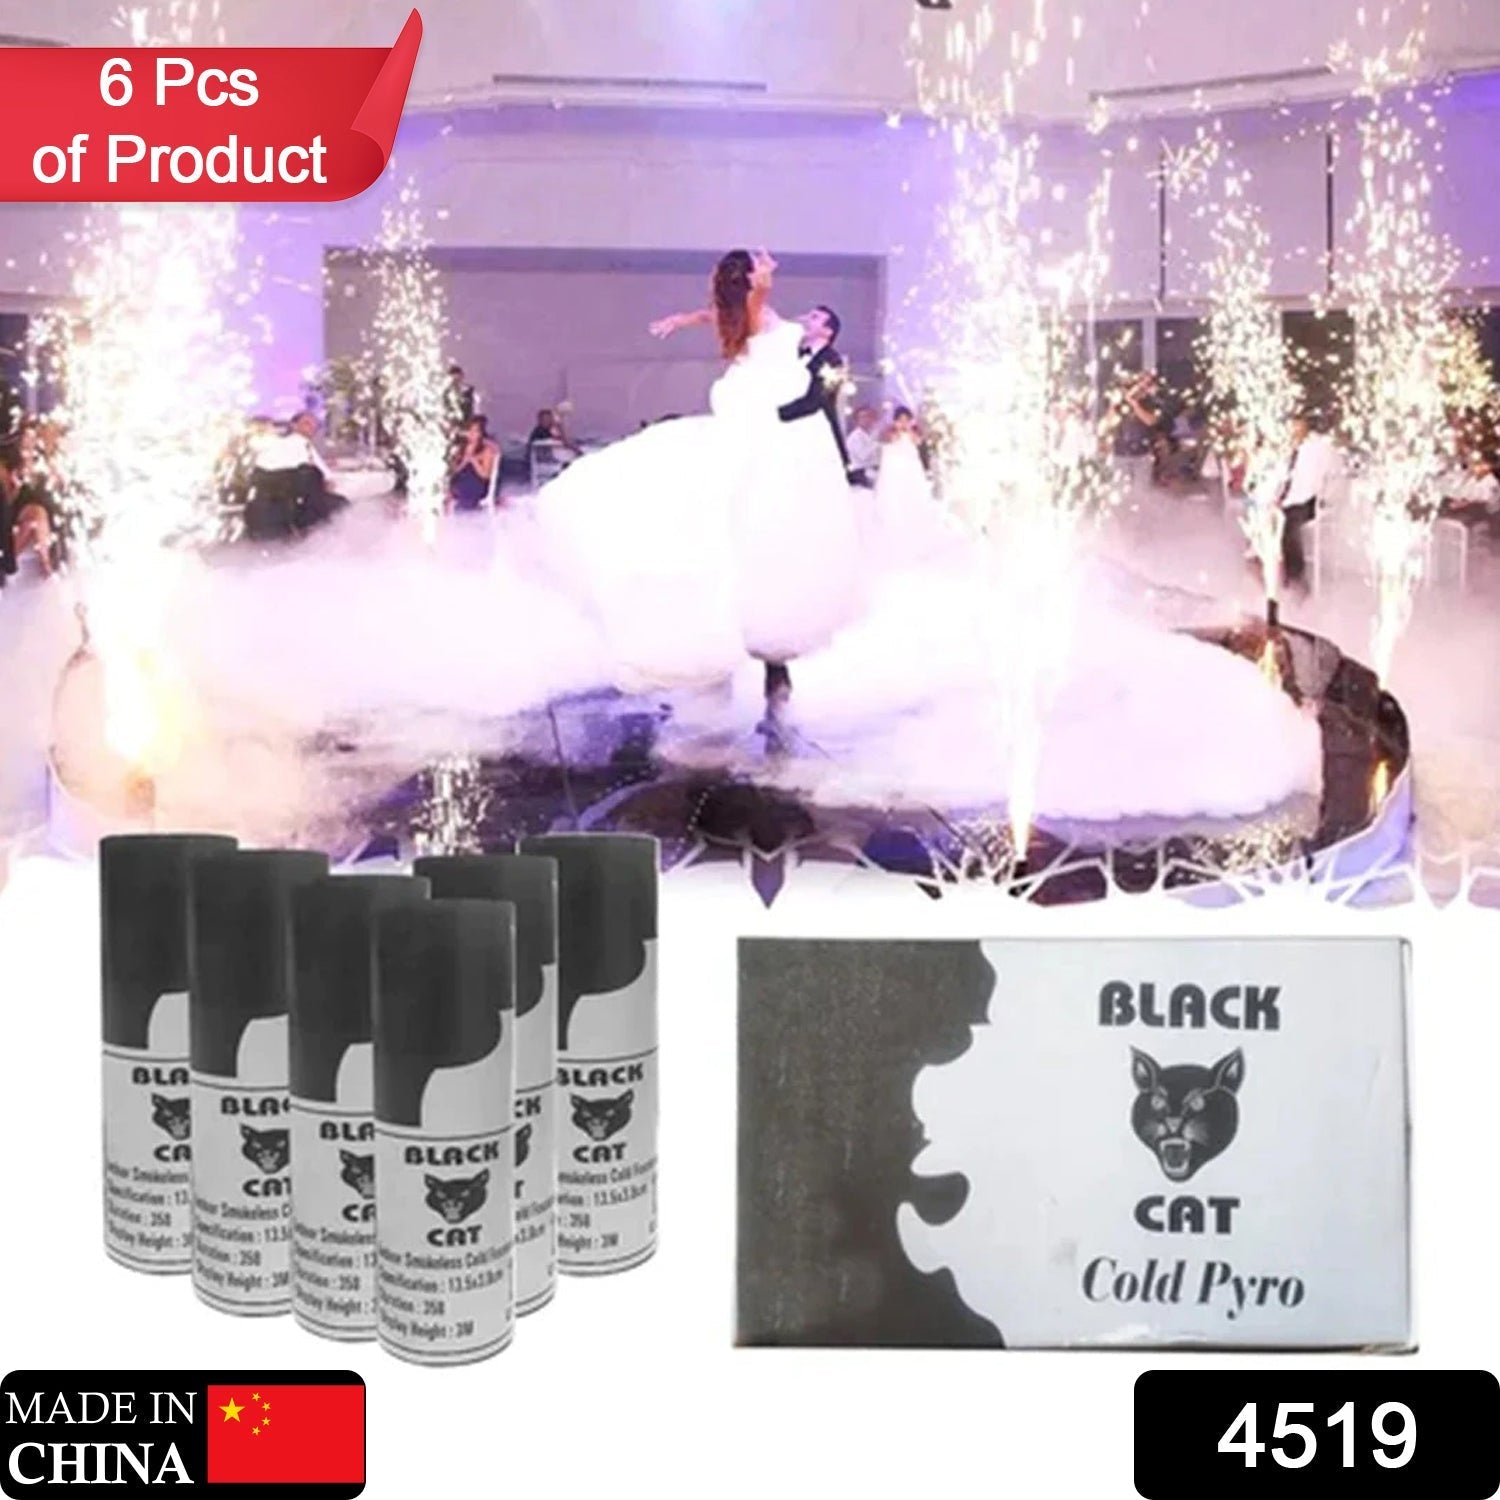 4519 Cold Payro Refill Cold Fire Shower of Sparks Use For Parties Functions Events and All Kind of Celebrations (Pack Of 6 Pc ) 